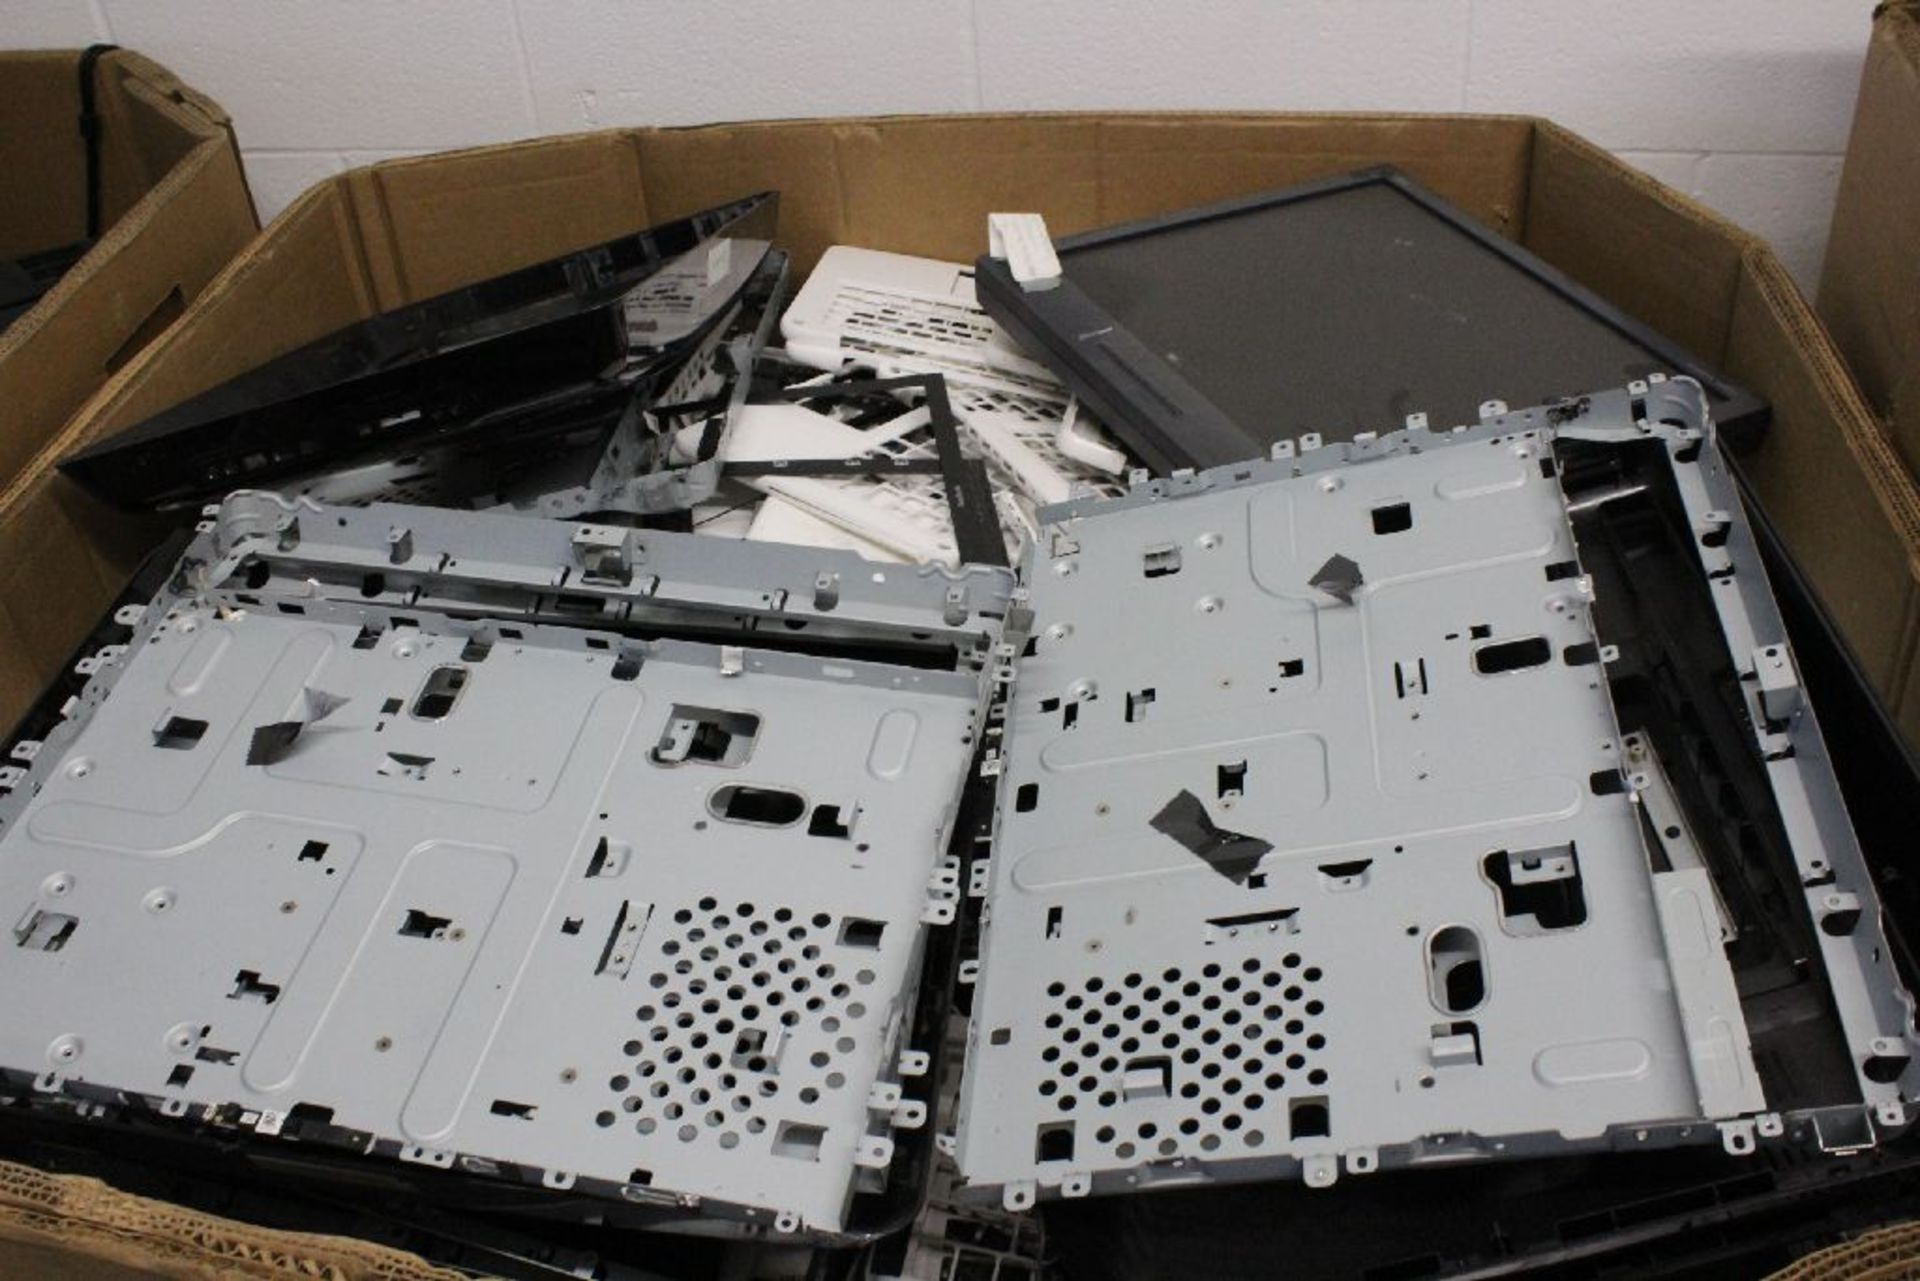 ASSORTED ELECTRONIC SCRAP INCLUDING PLASTIC HOUSING AND COMPUTER COMPONENTS - Image 2 of 2